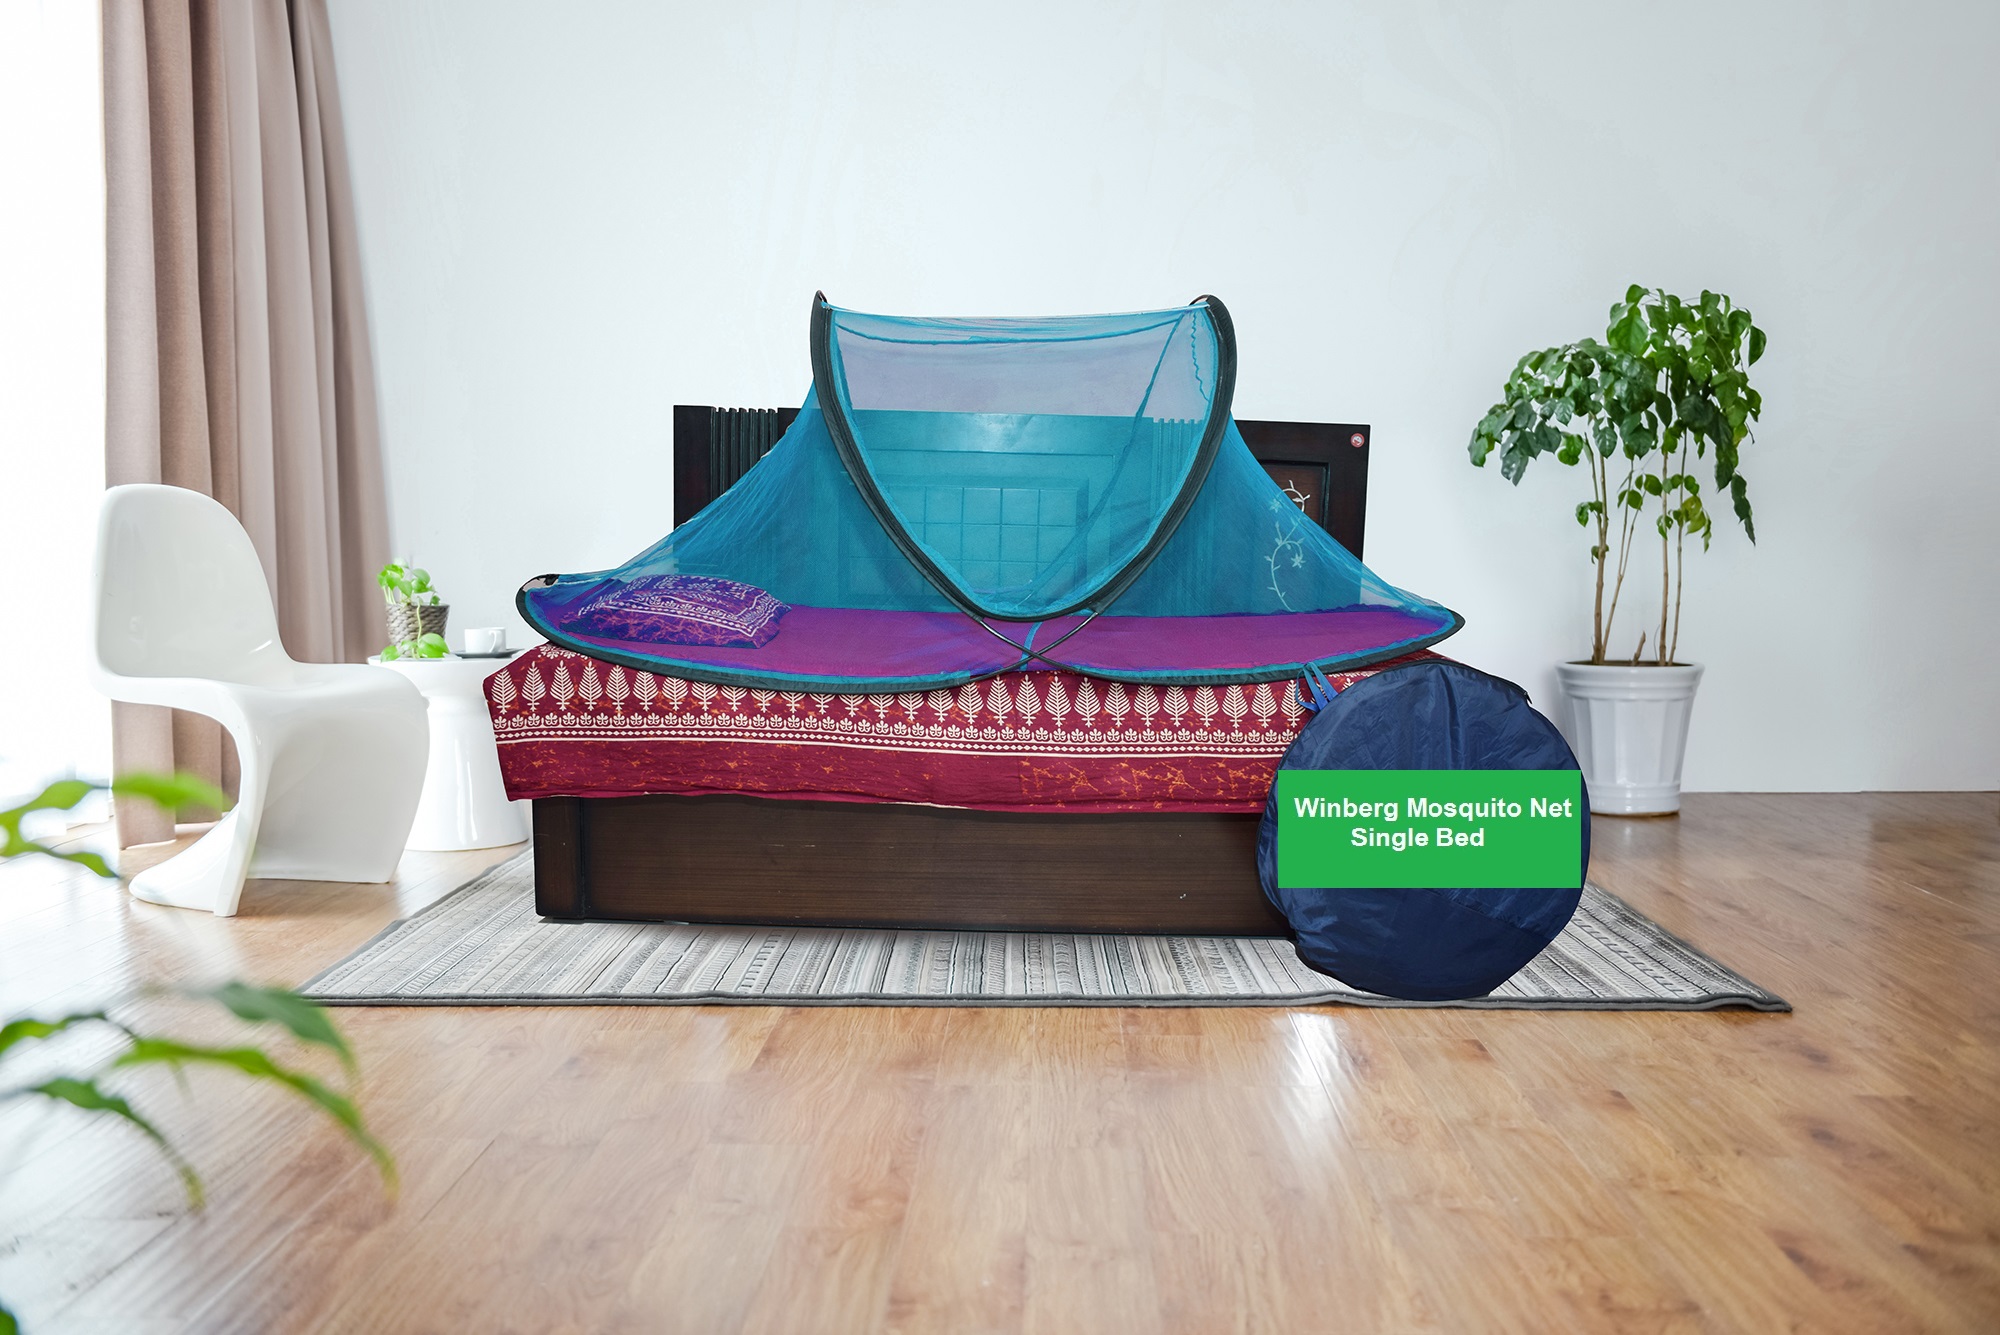 Winberg® Mosquito Net Foldable Single Bed Net Maximum Insect